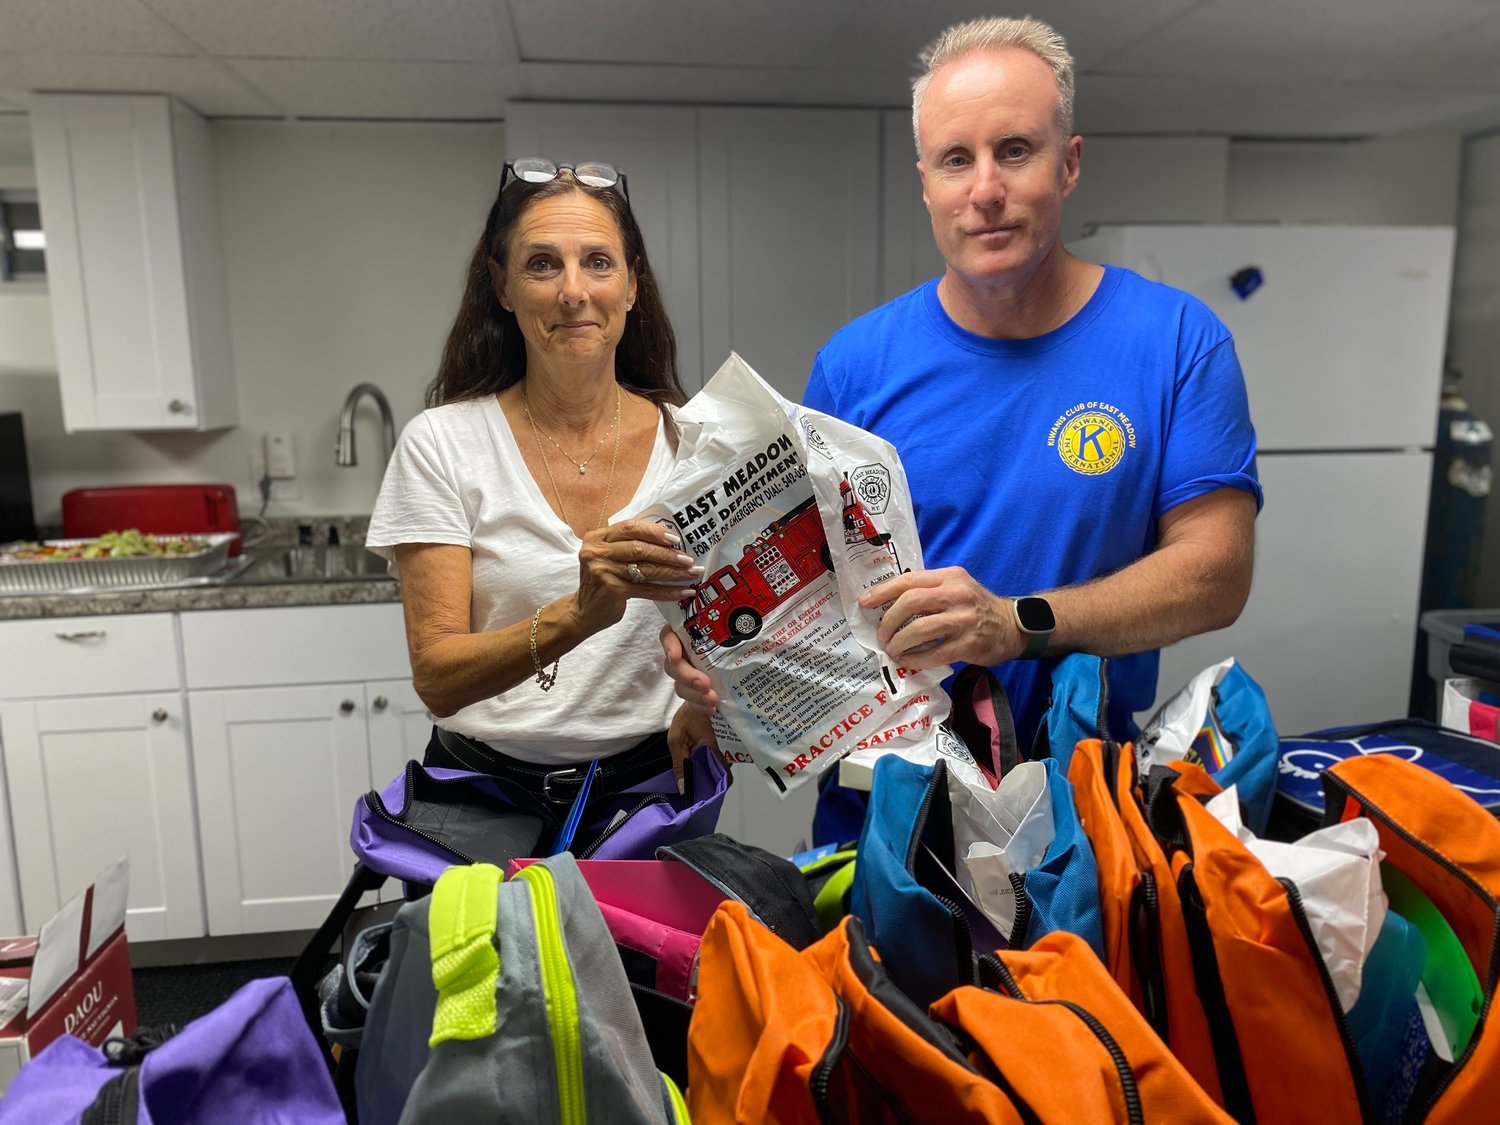 Diane Krug and Brian O’Flaherty helped fill backpacks on Aug. 23 at the East Meadow Kiwanis club’s ‘Pack a Backpack’ event. The backpacks will go to children in need in the district.